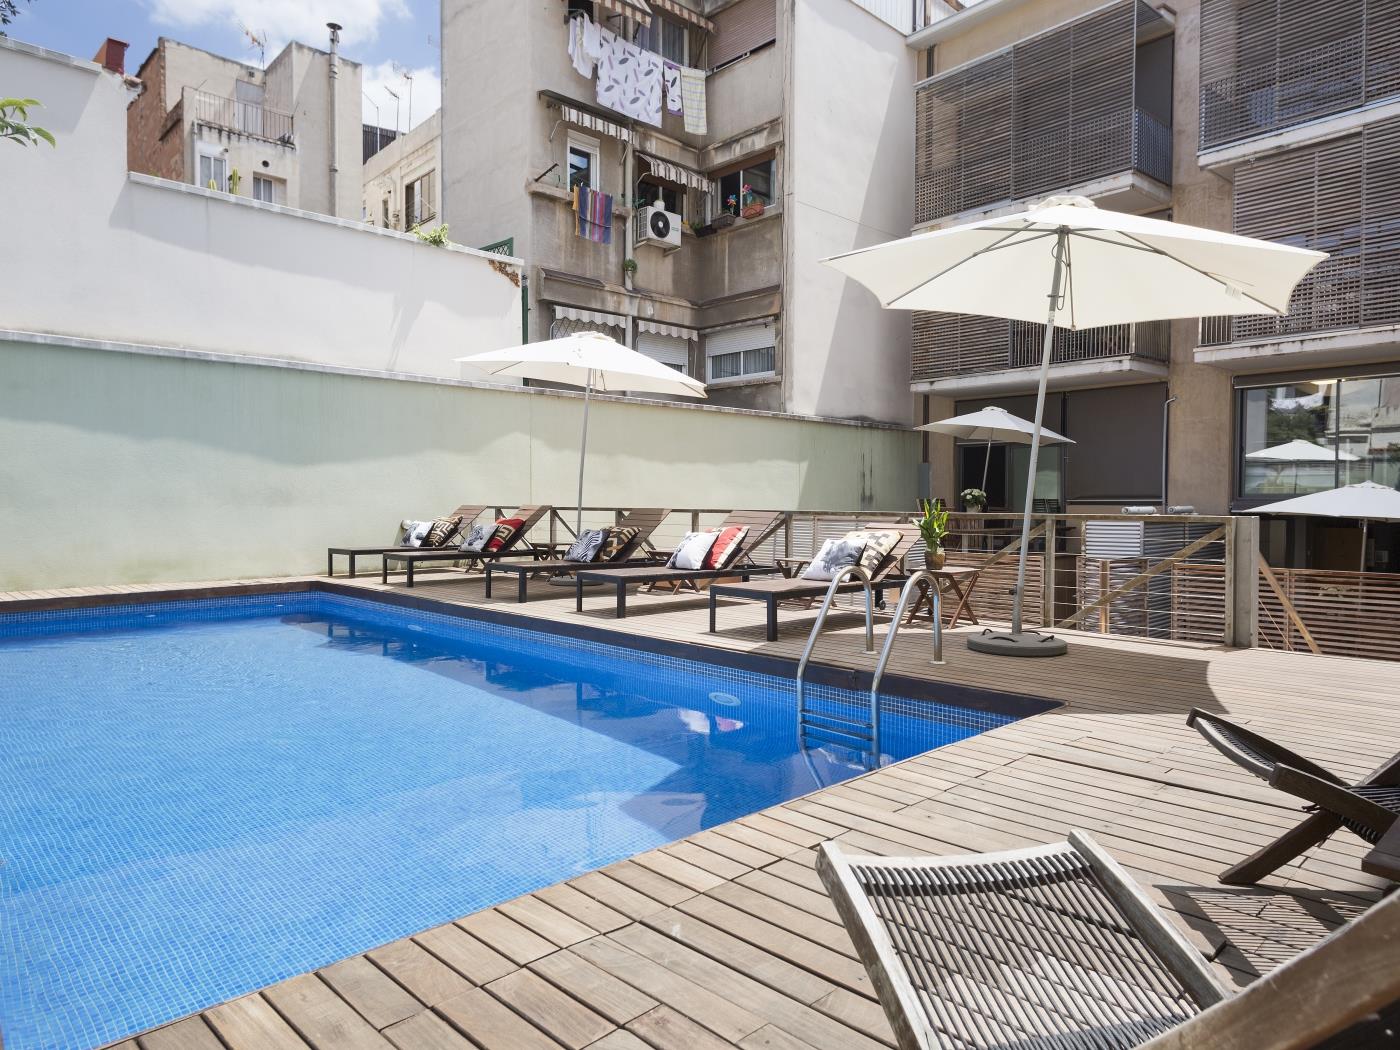 Gracia loft with privatve terrace and shared pool - My Space Barcelona Mieszkanie